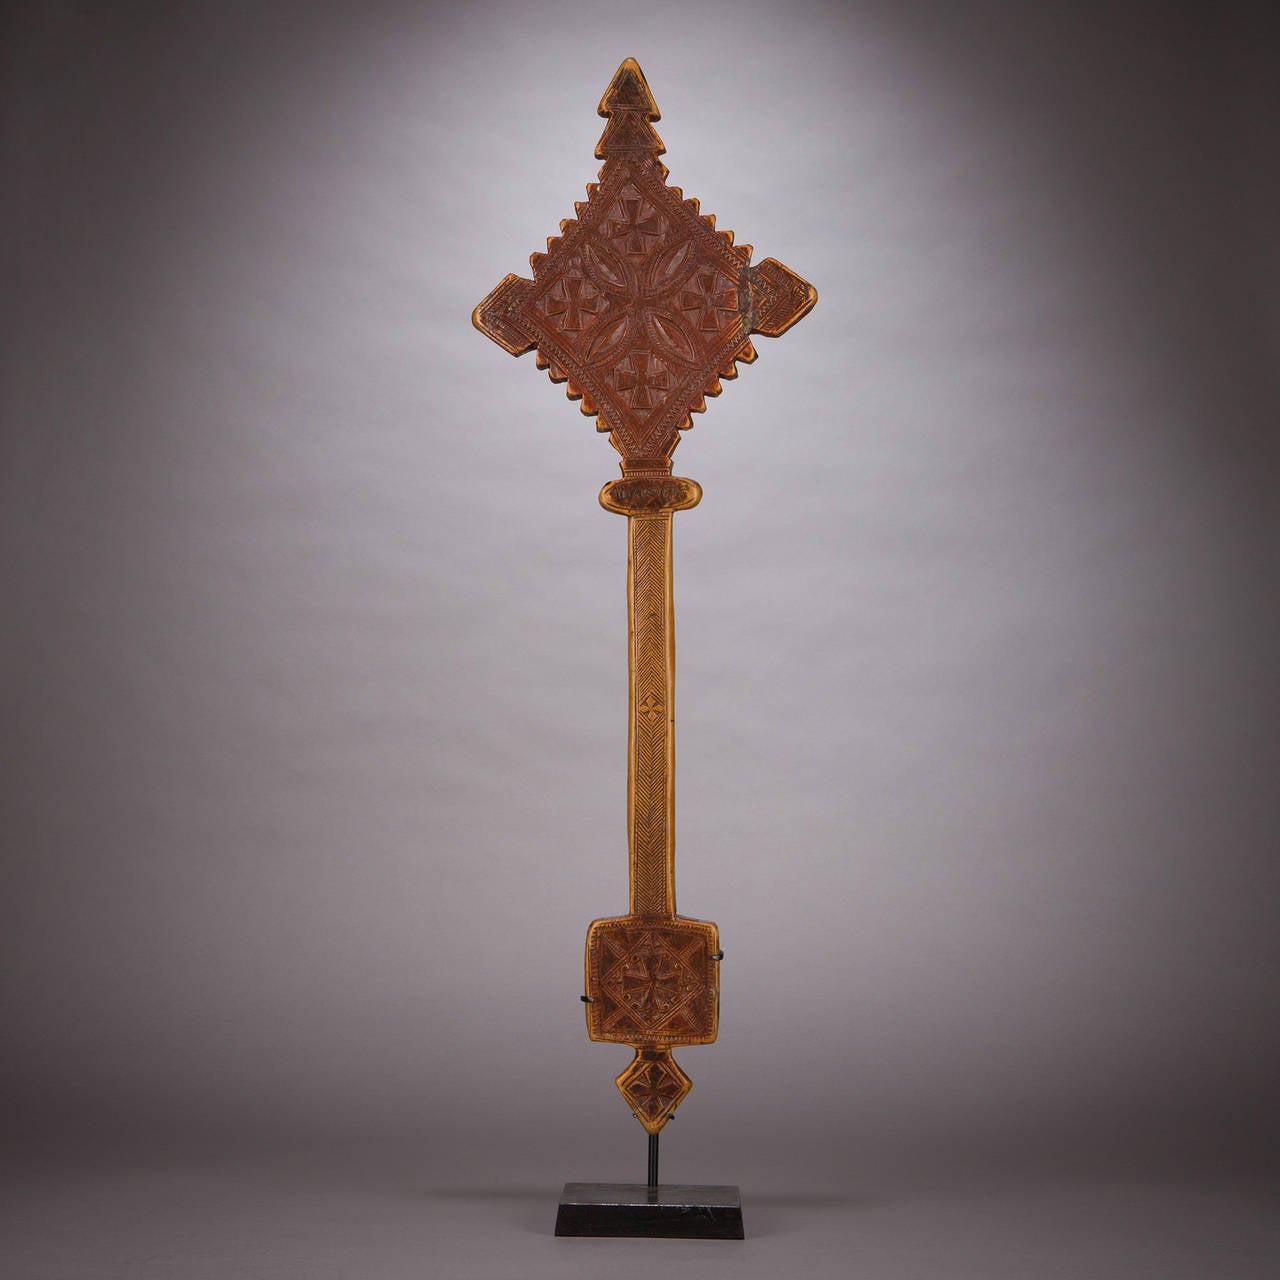 A large and fine liturgical hand cross.

Ethiopian hand crosses are coveted by collectors of medieval art, religious art and tribal art for their beauty and variety of forms.

Ethiopia was probably the second country after Armenia to embrace the